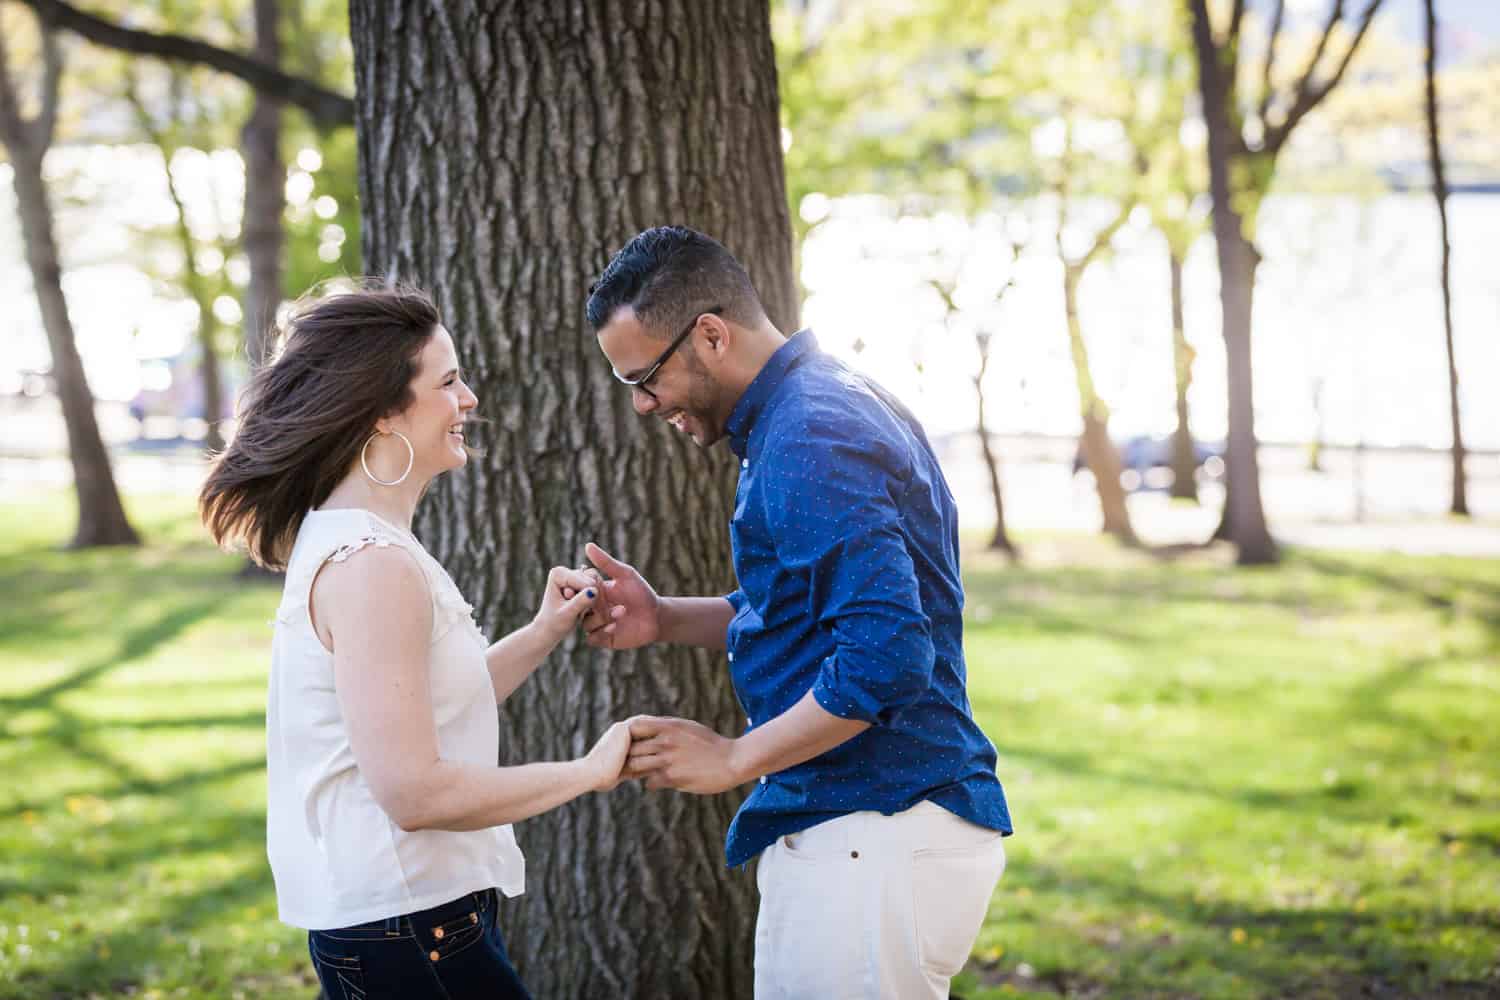 Couple dancing in front of tree during an Astoria Park engagement shoot